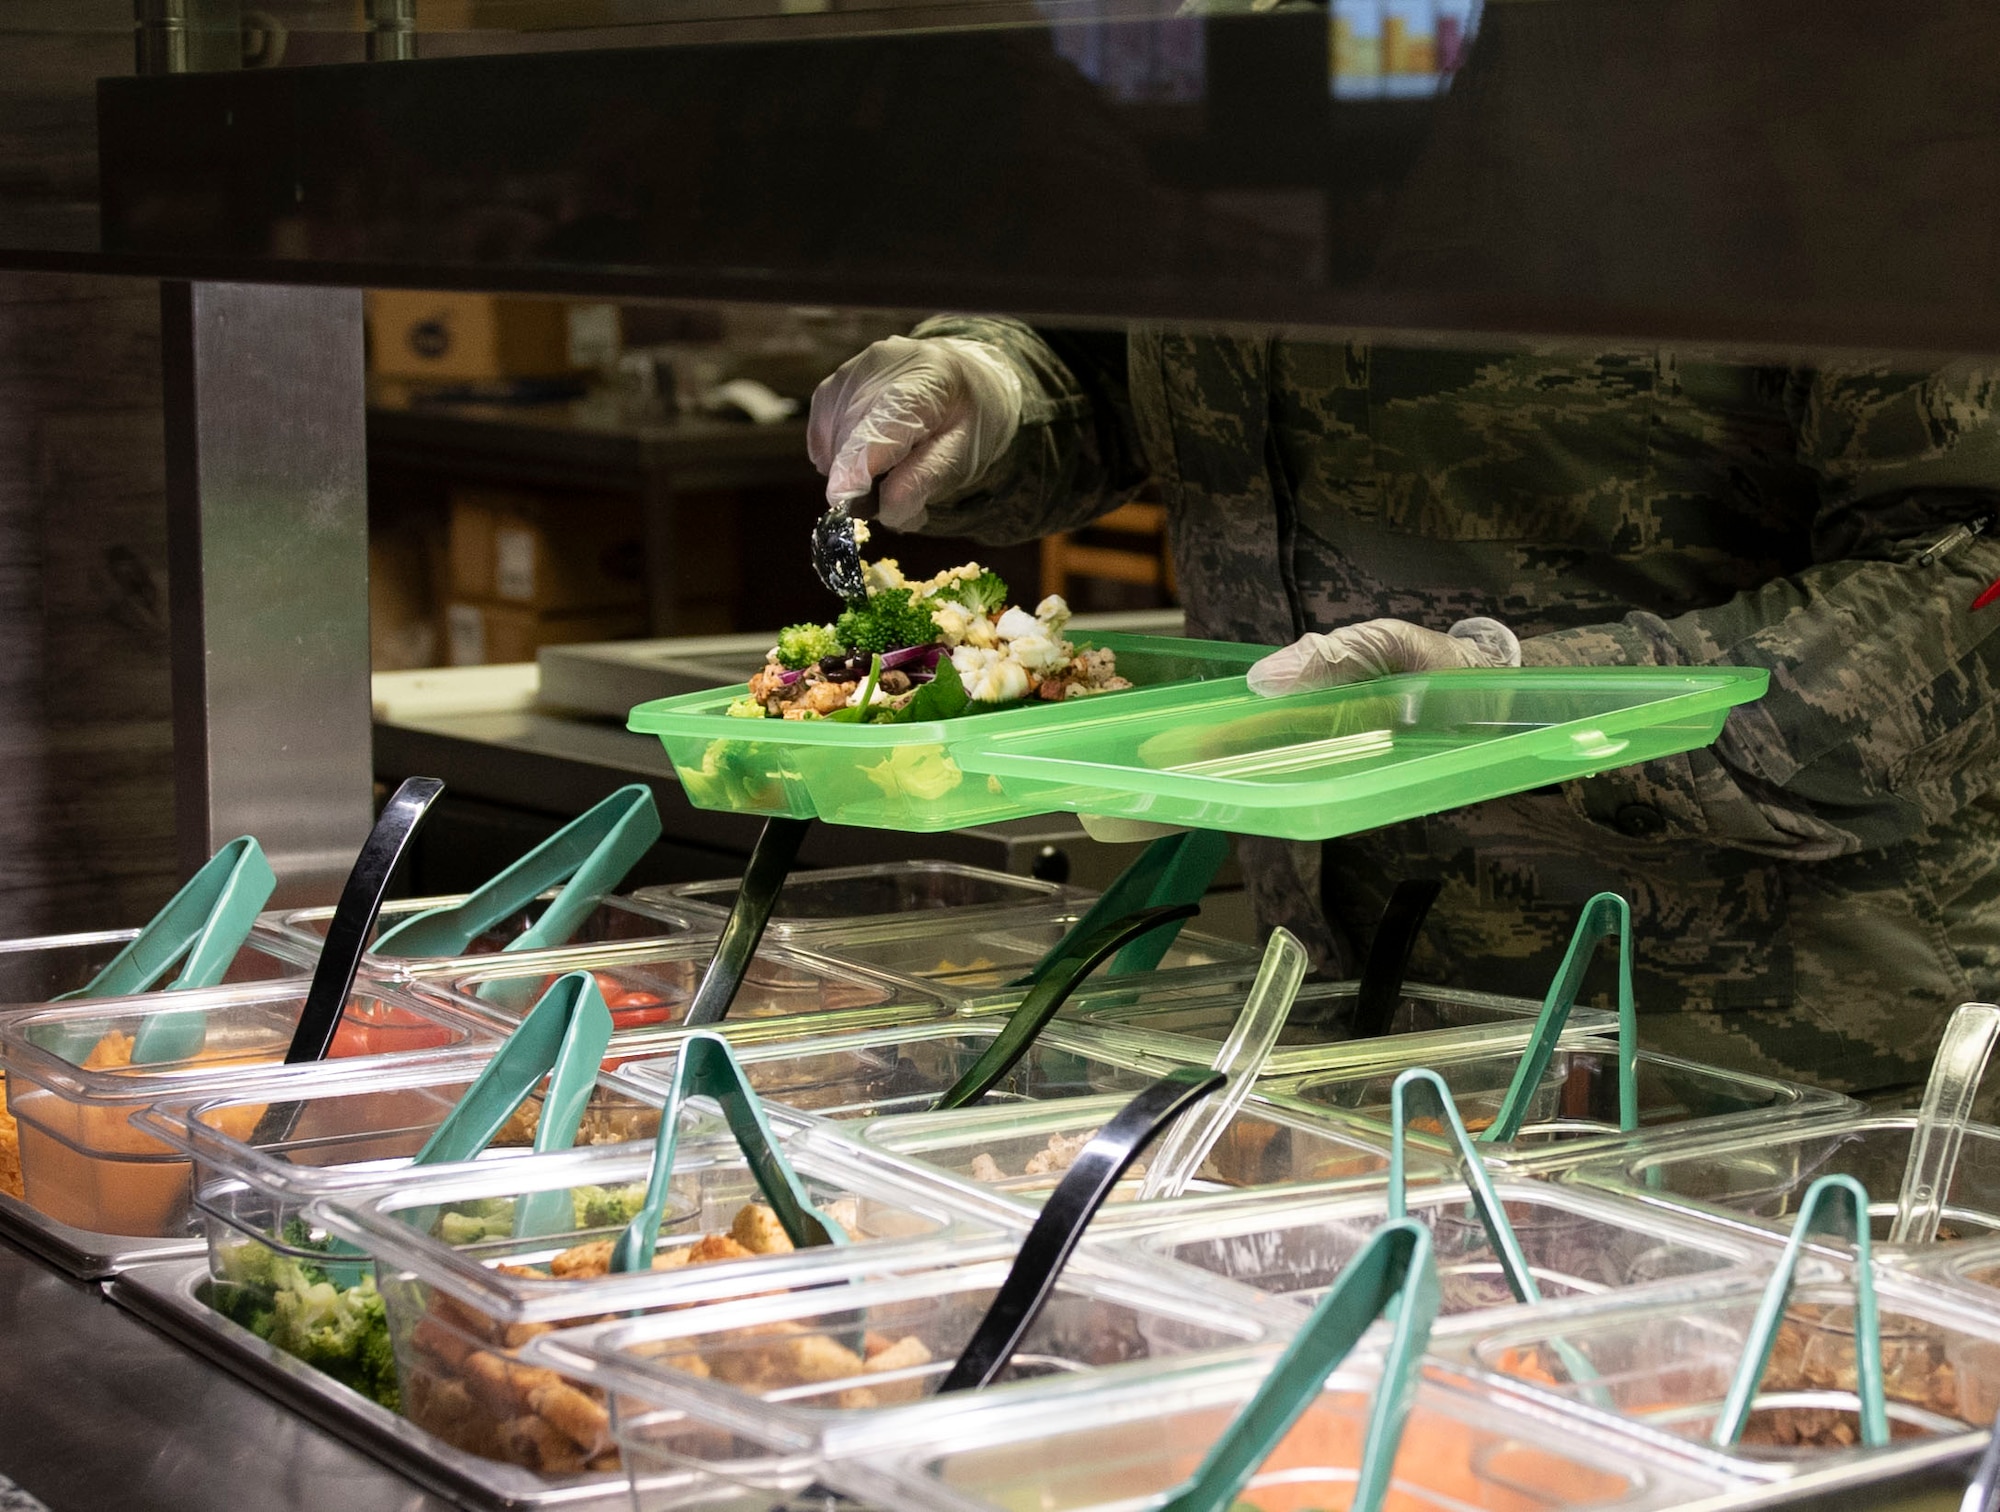 U.S. Air Force Senior Airman Joniece Guerrero, 52nd Force Support Squadron food service journeyman, prepares a food order at Spangdahlem Air Base, Germany, April 20, 2020.
OZZI trays were implemented to improve the quality of life and work centers for Airmen and families. (U.S. Air Force photo by Senior Airman Melody W. Howley)